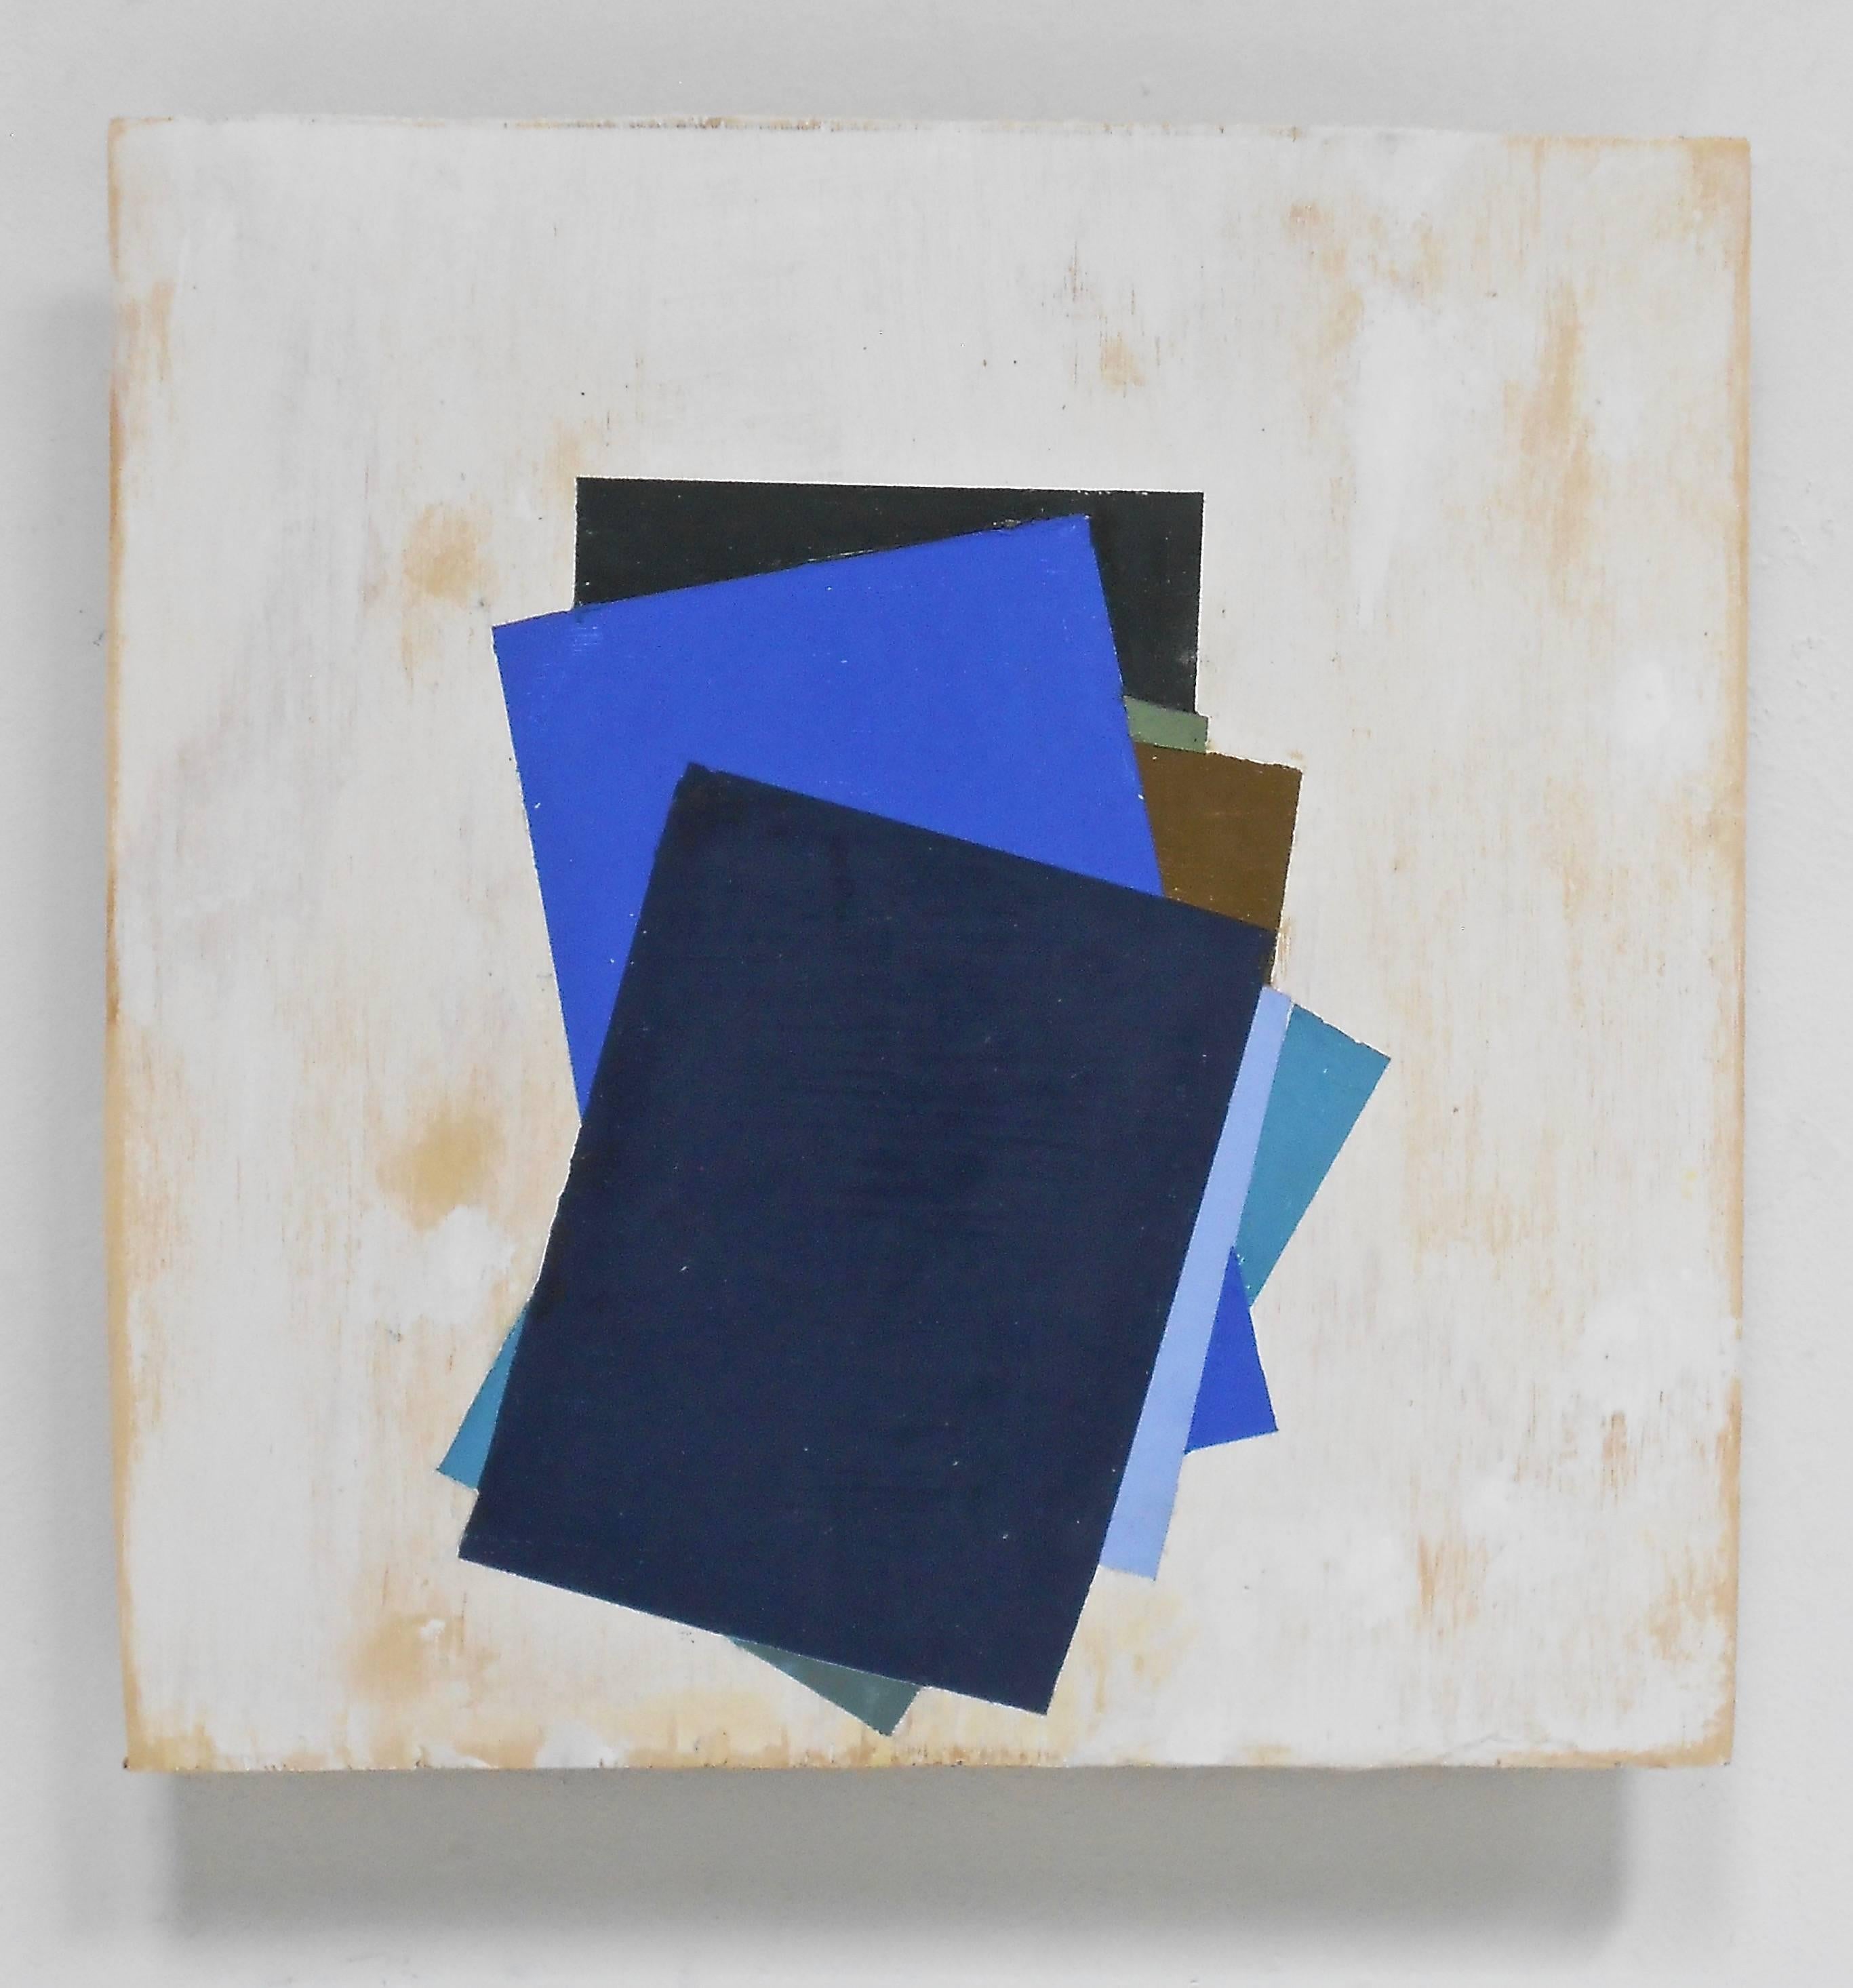 Jean Feinberg Abstract Painting - "Navy" Geometric Abstract Blue Black Mixed Media Oil on Wood